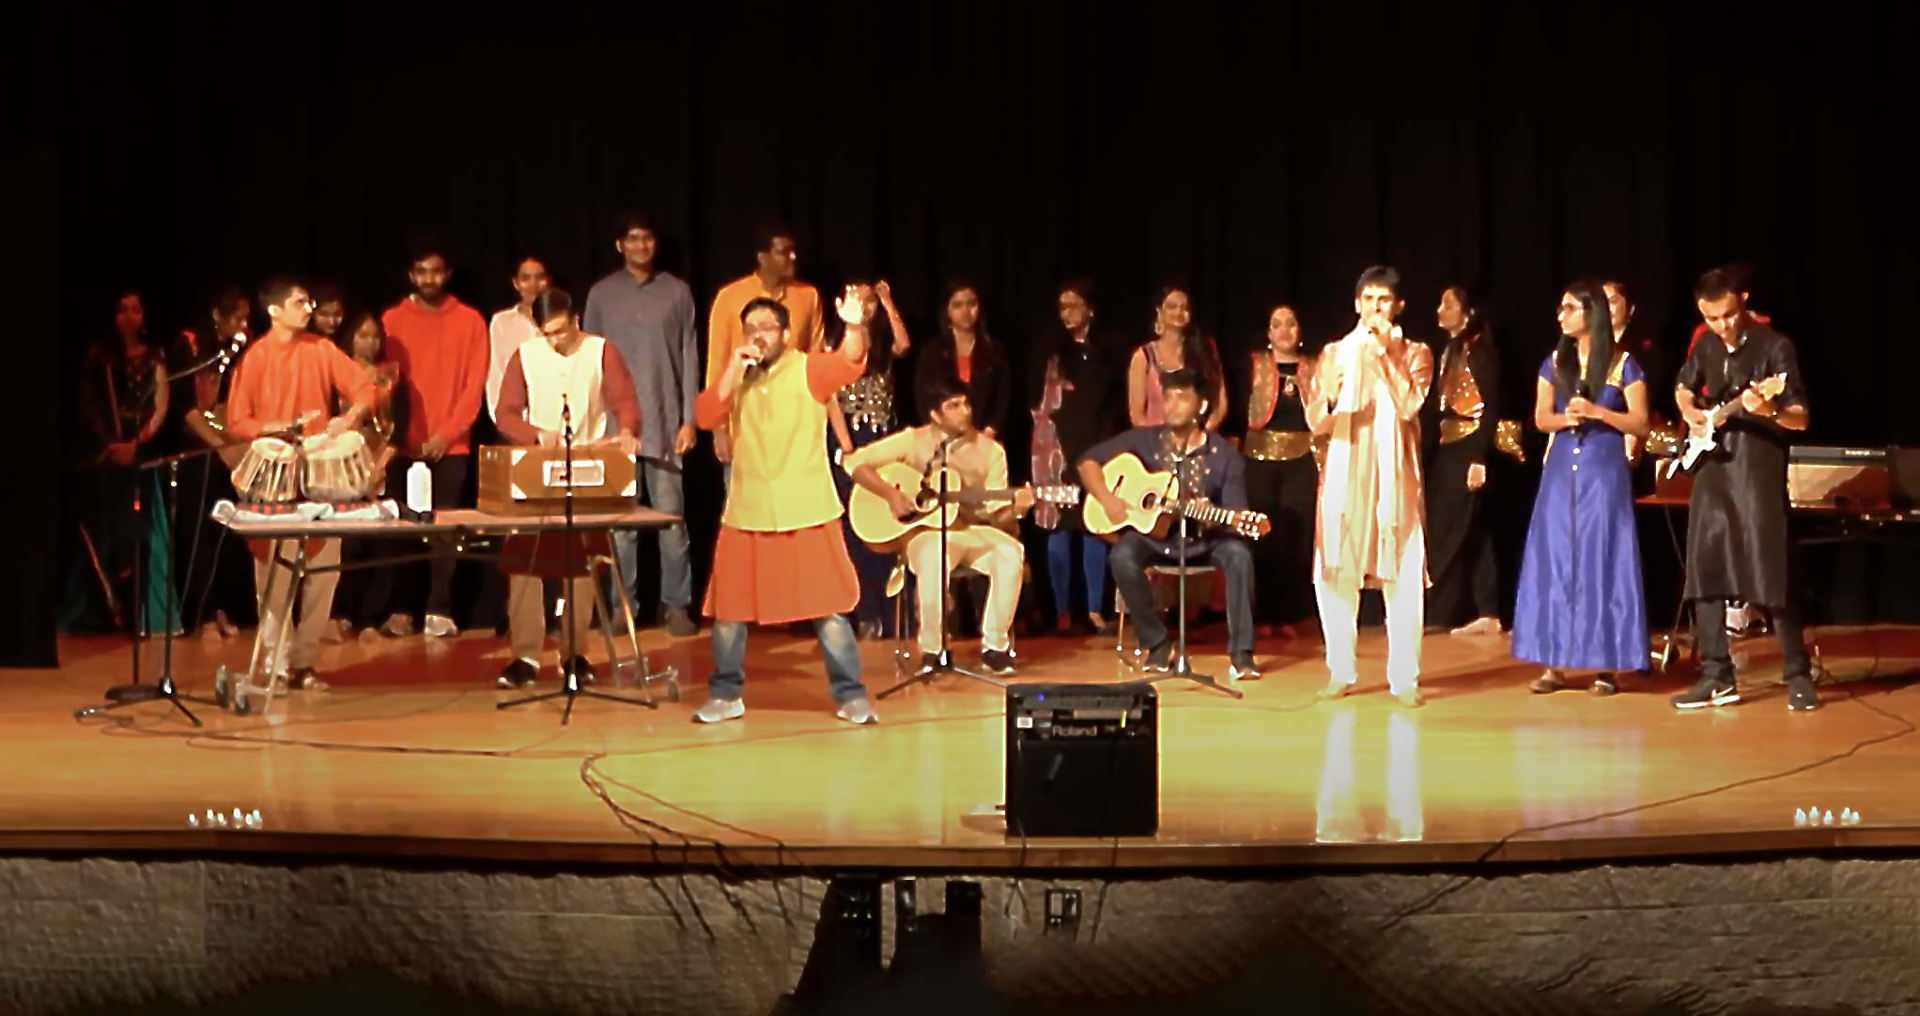 Group photo of Desi Utsav performers on stage with drums, guitars, and other instruments.